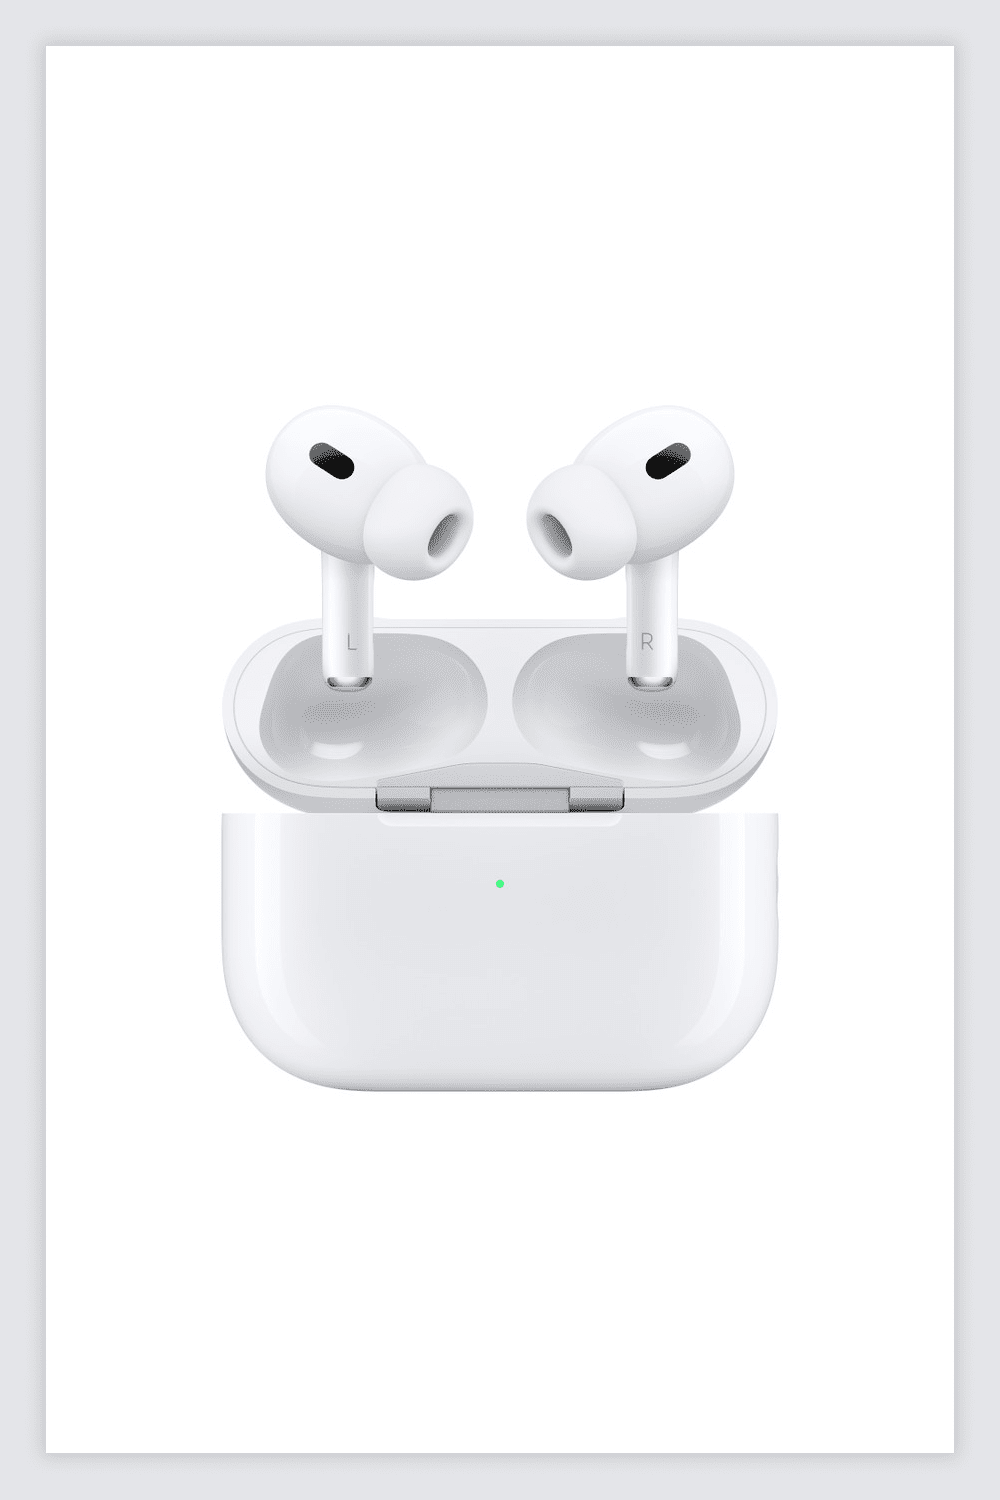 White Apple AirPods Pro.